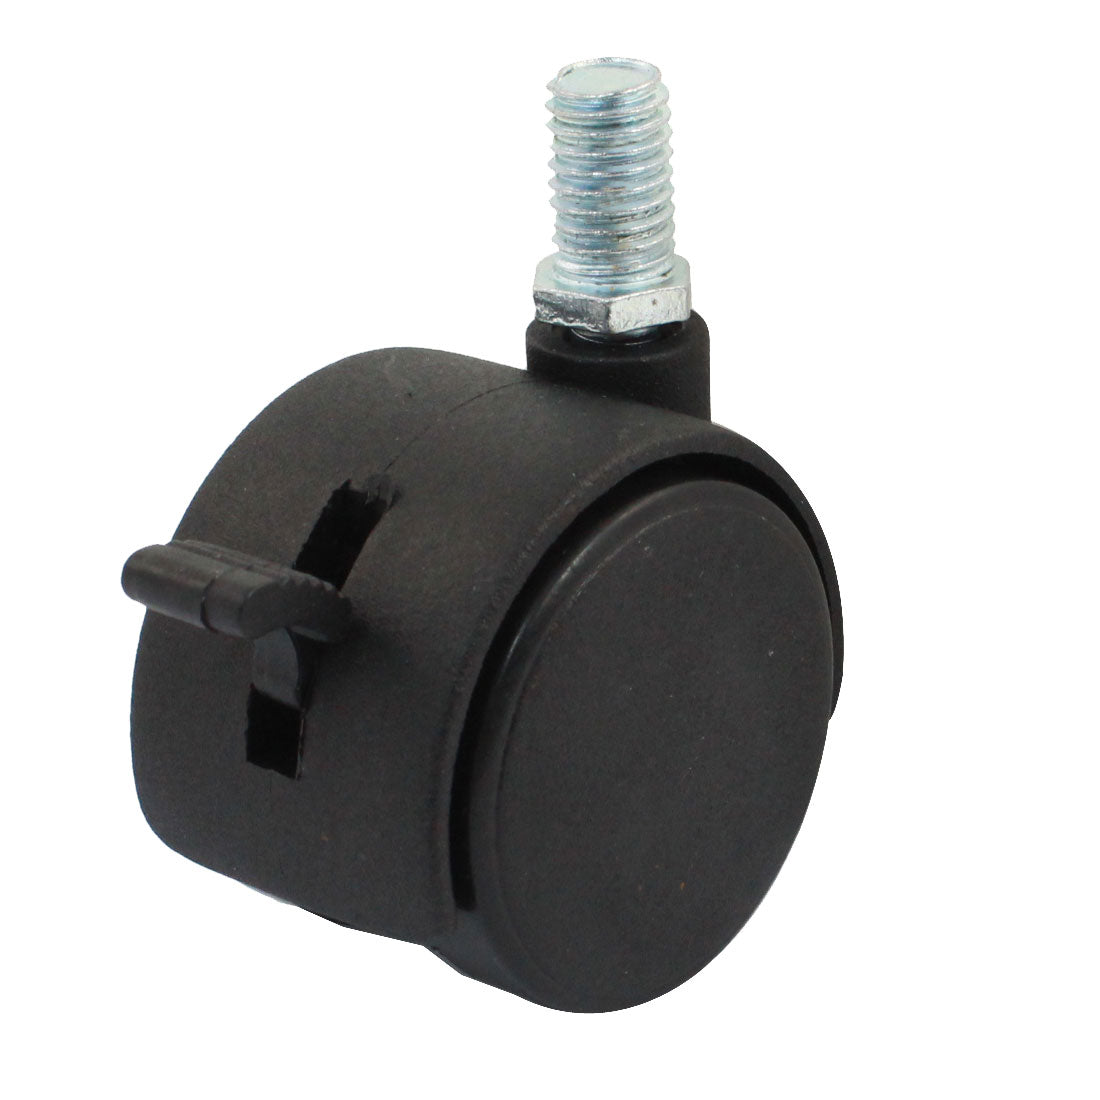 uxcell Uxcell 10mm Thread Stem Connector 1.5" Twin Wheel Swivel Brake Caster Black for Office Chair Furniture